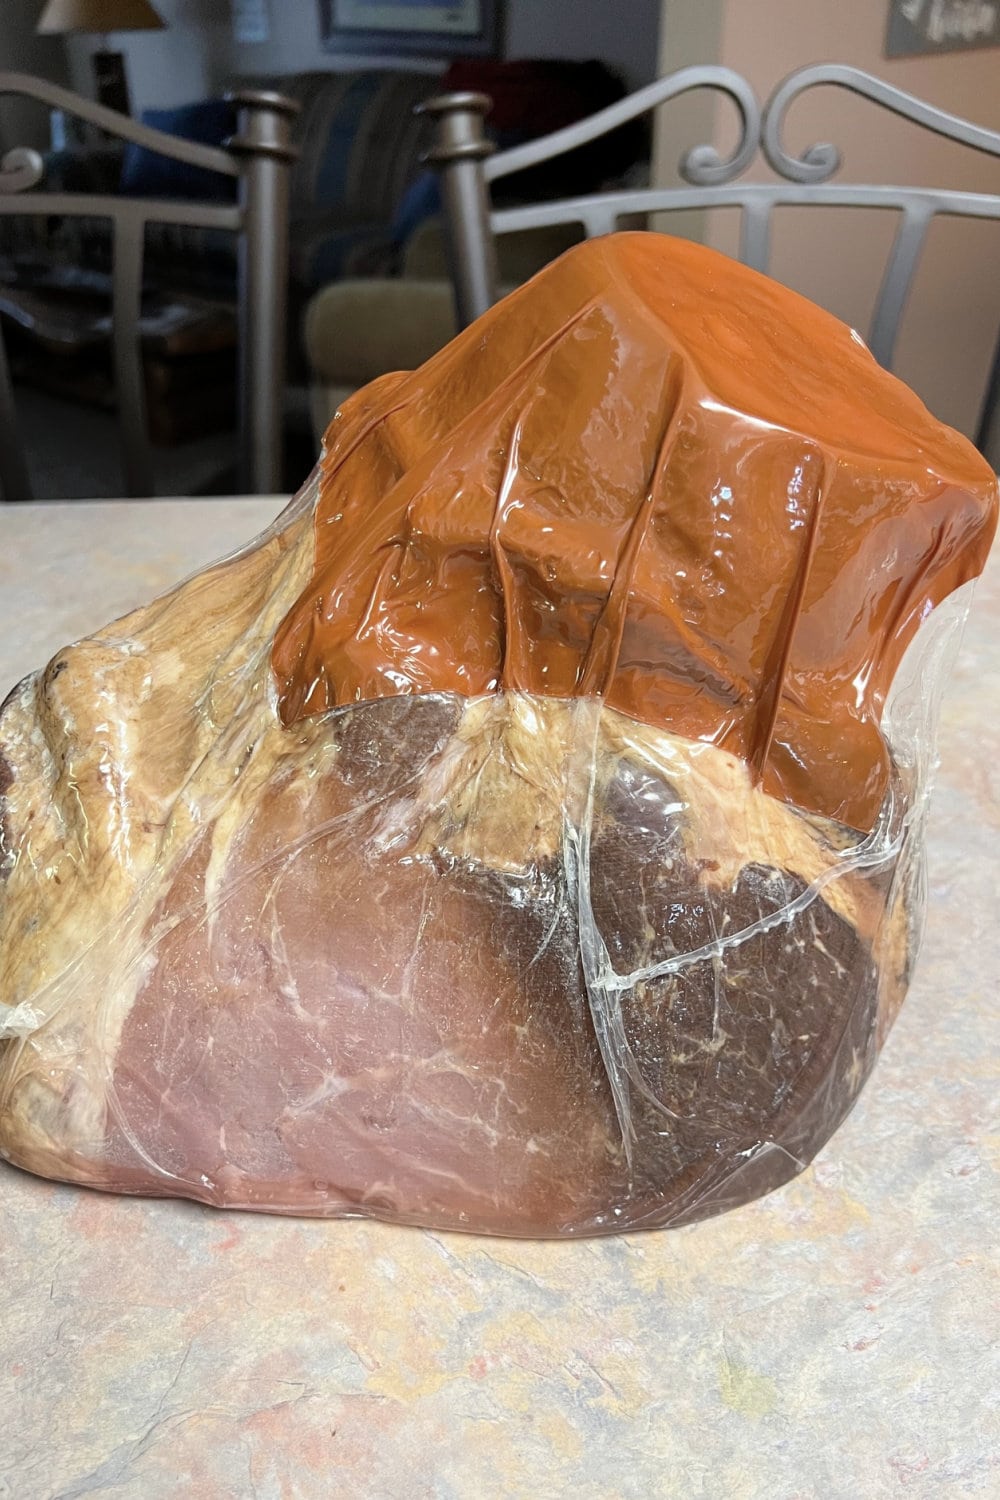 Side view of a half ham.